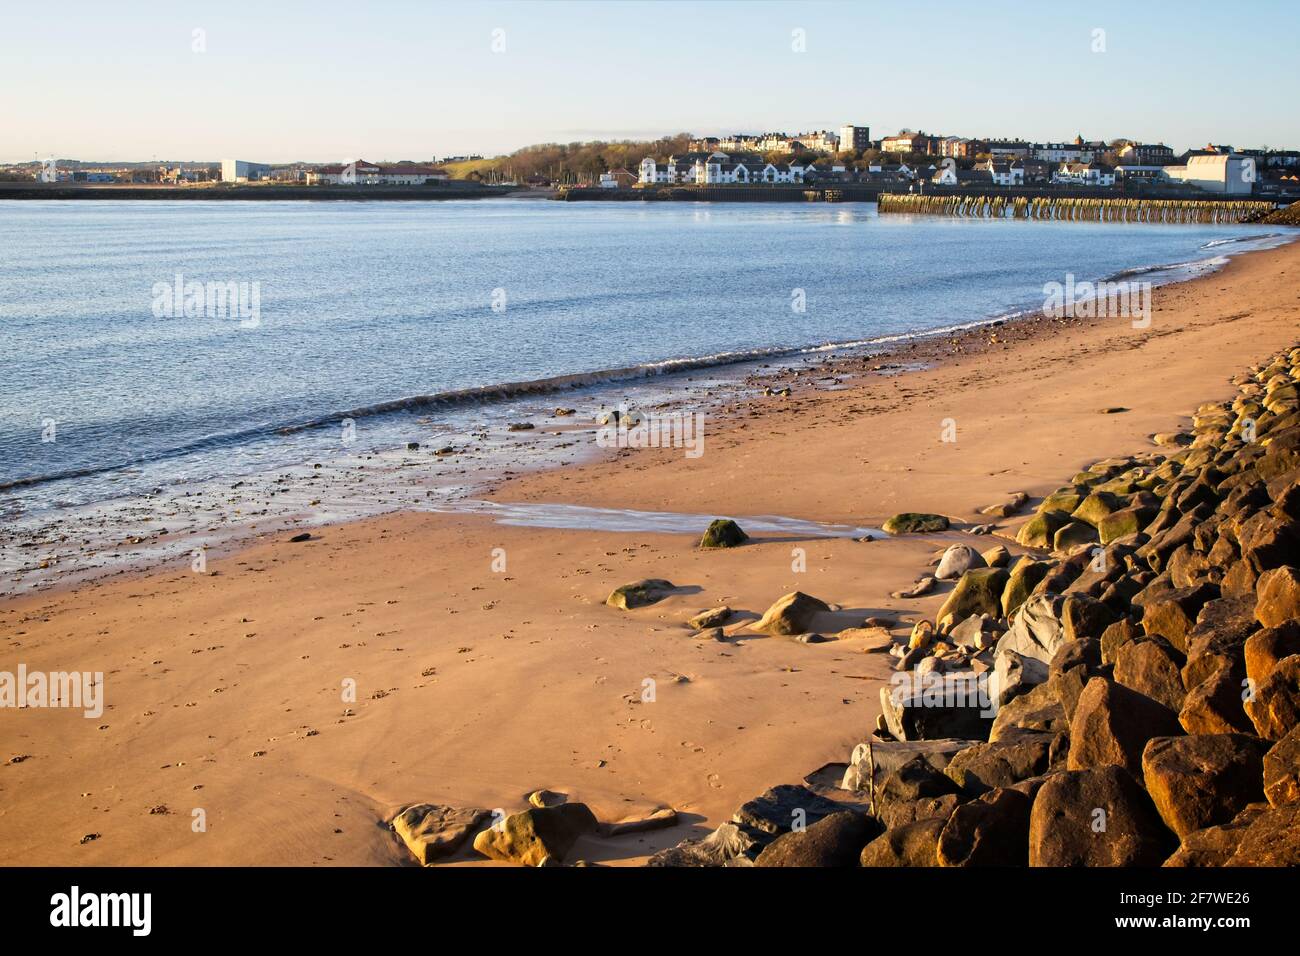 The Fish Quay Beach in North Shields, Tyne and Wear captured in early morning light. Stock Photo